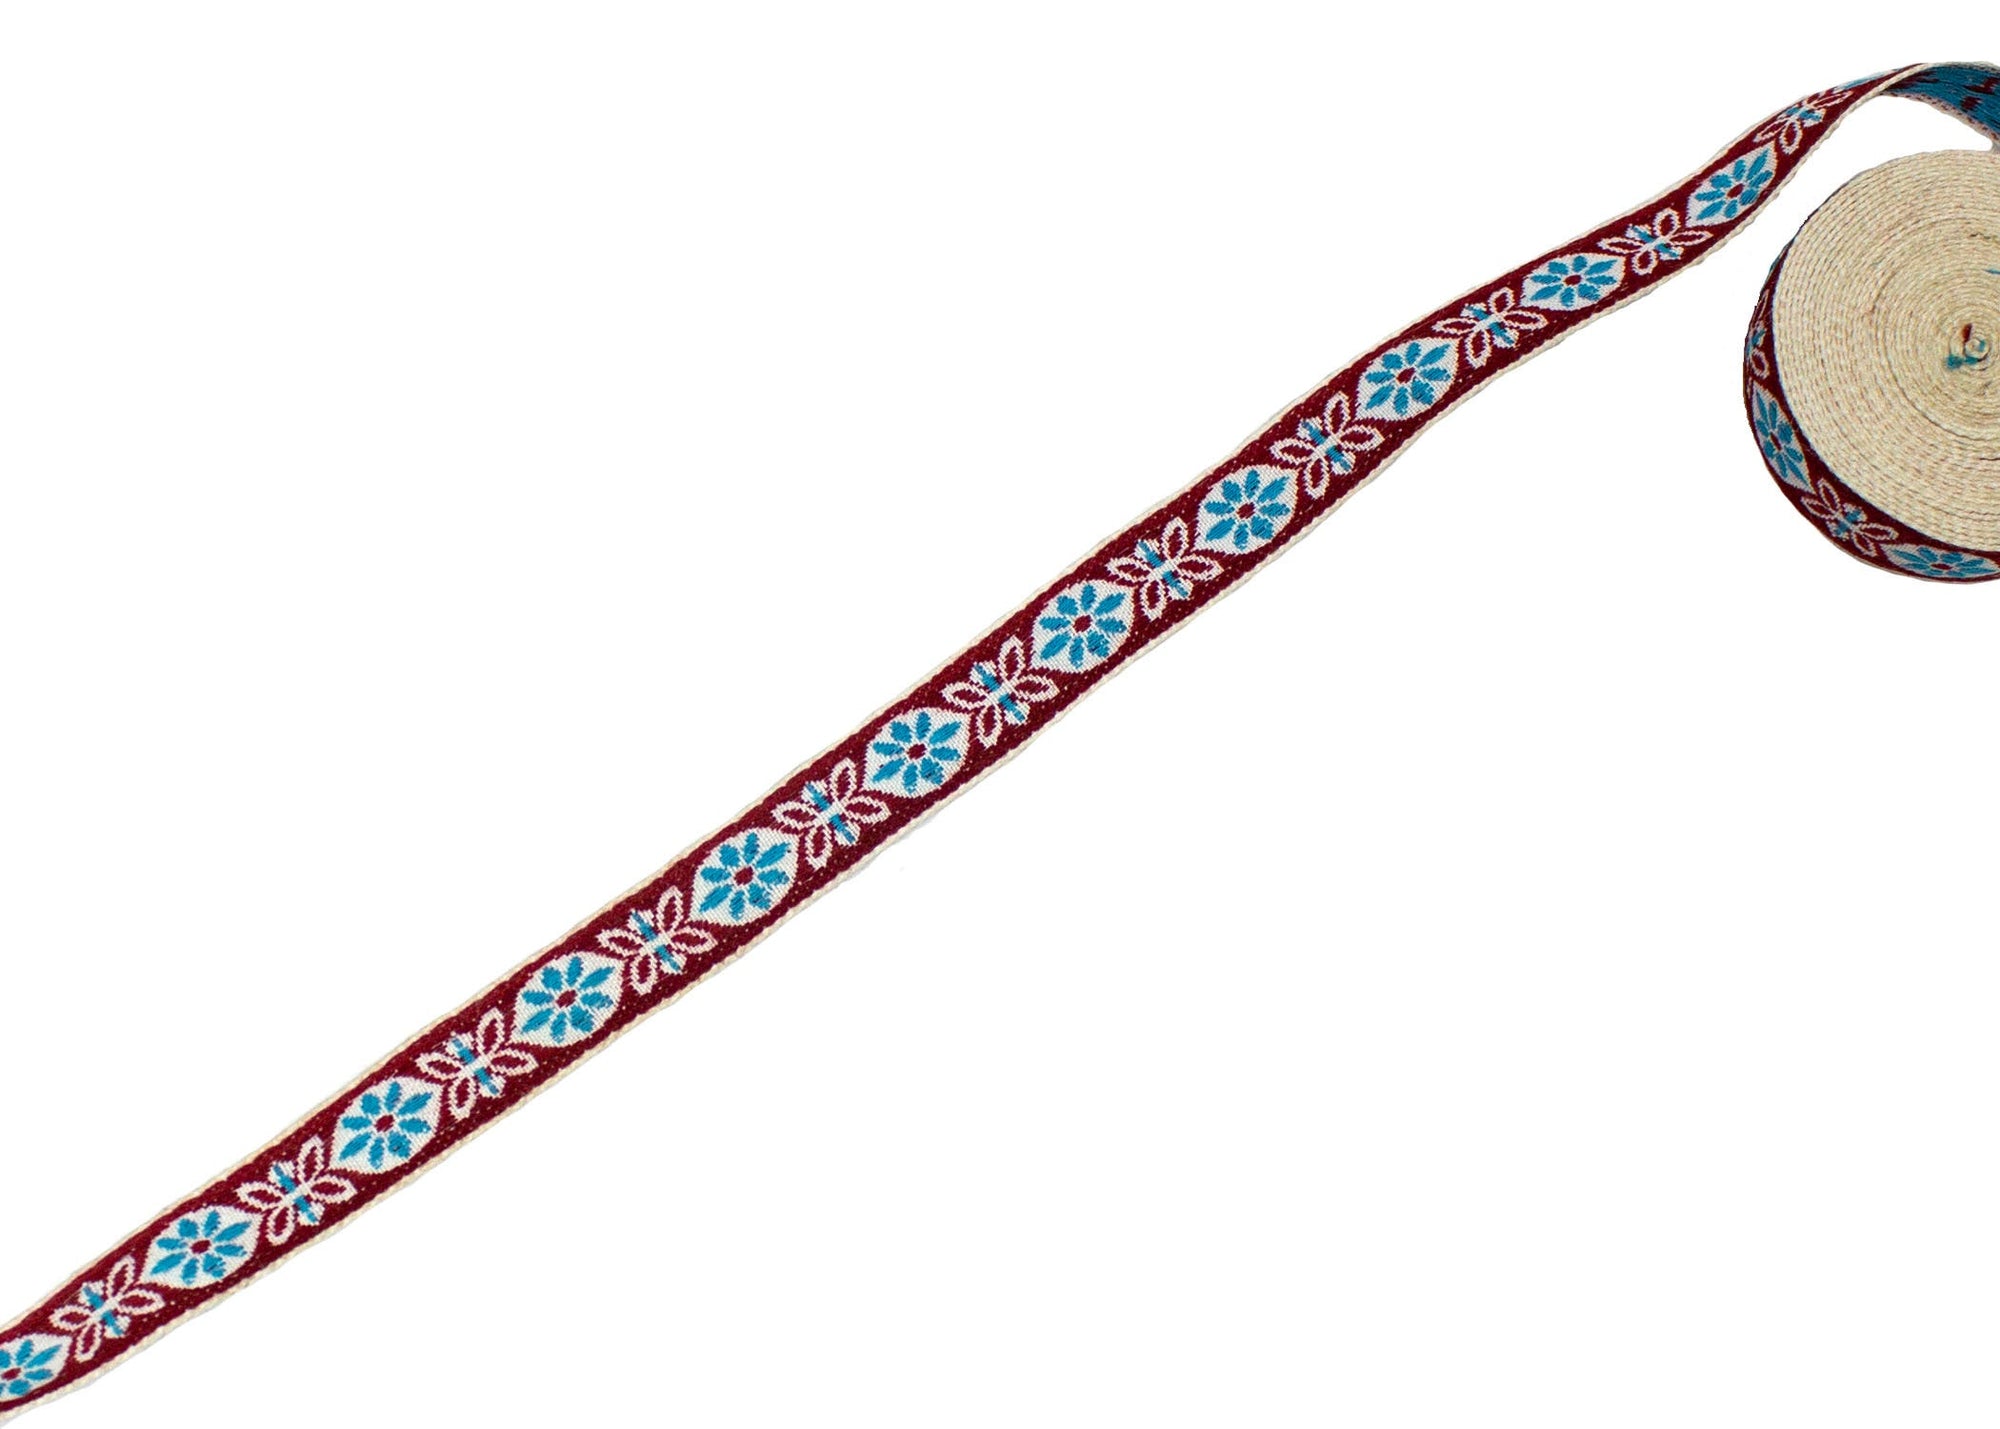 Vintage Ribbon Trim Red, White and Aqua Floral 9/16" - Sold by the Yard - Humboldt Haberdashery